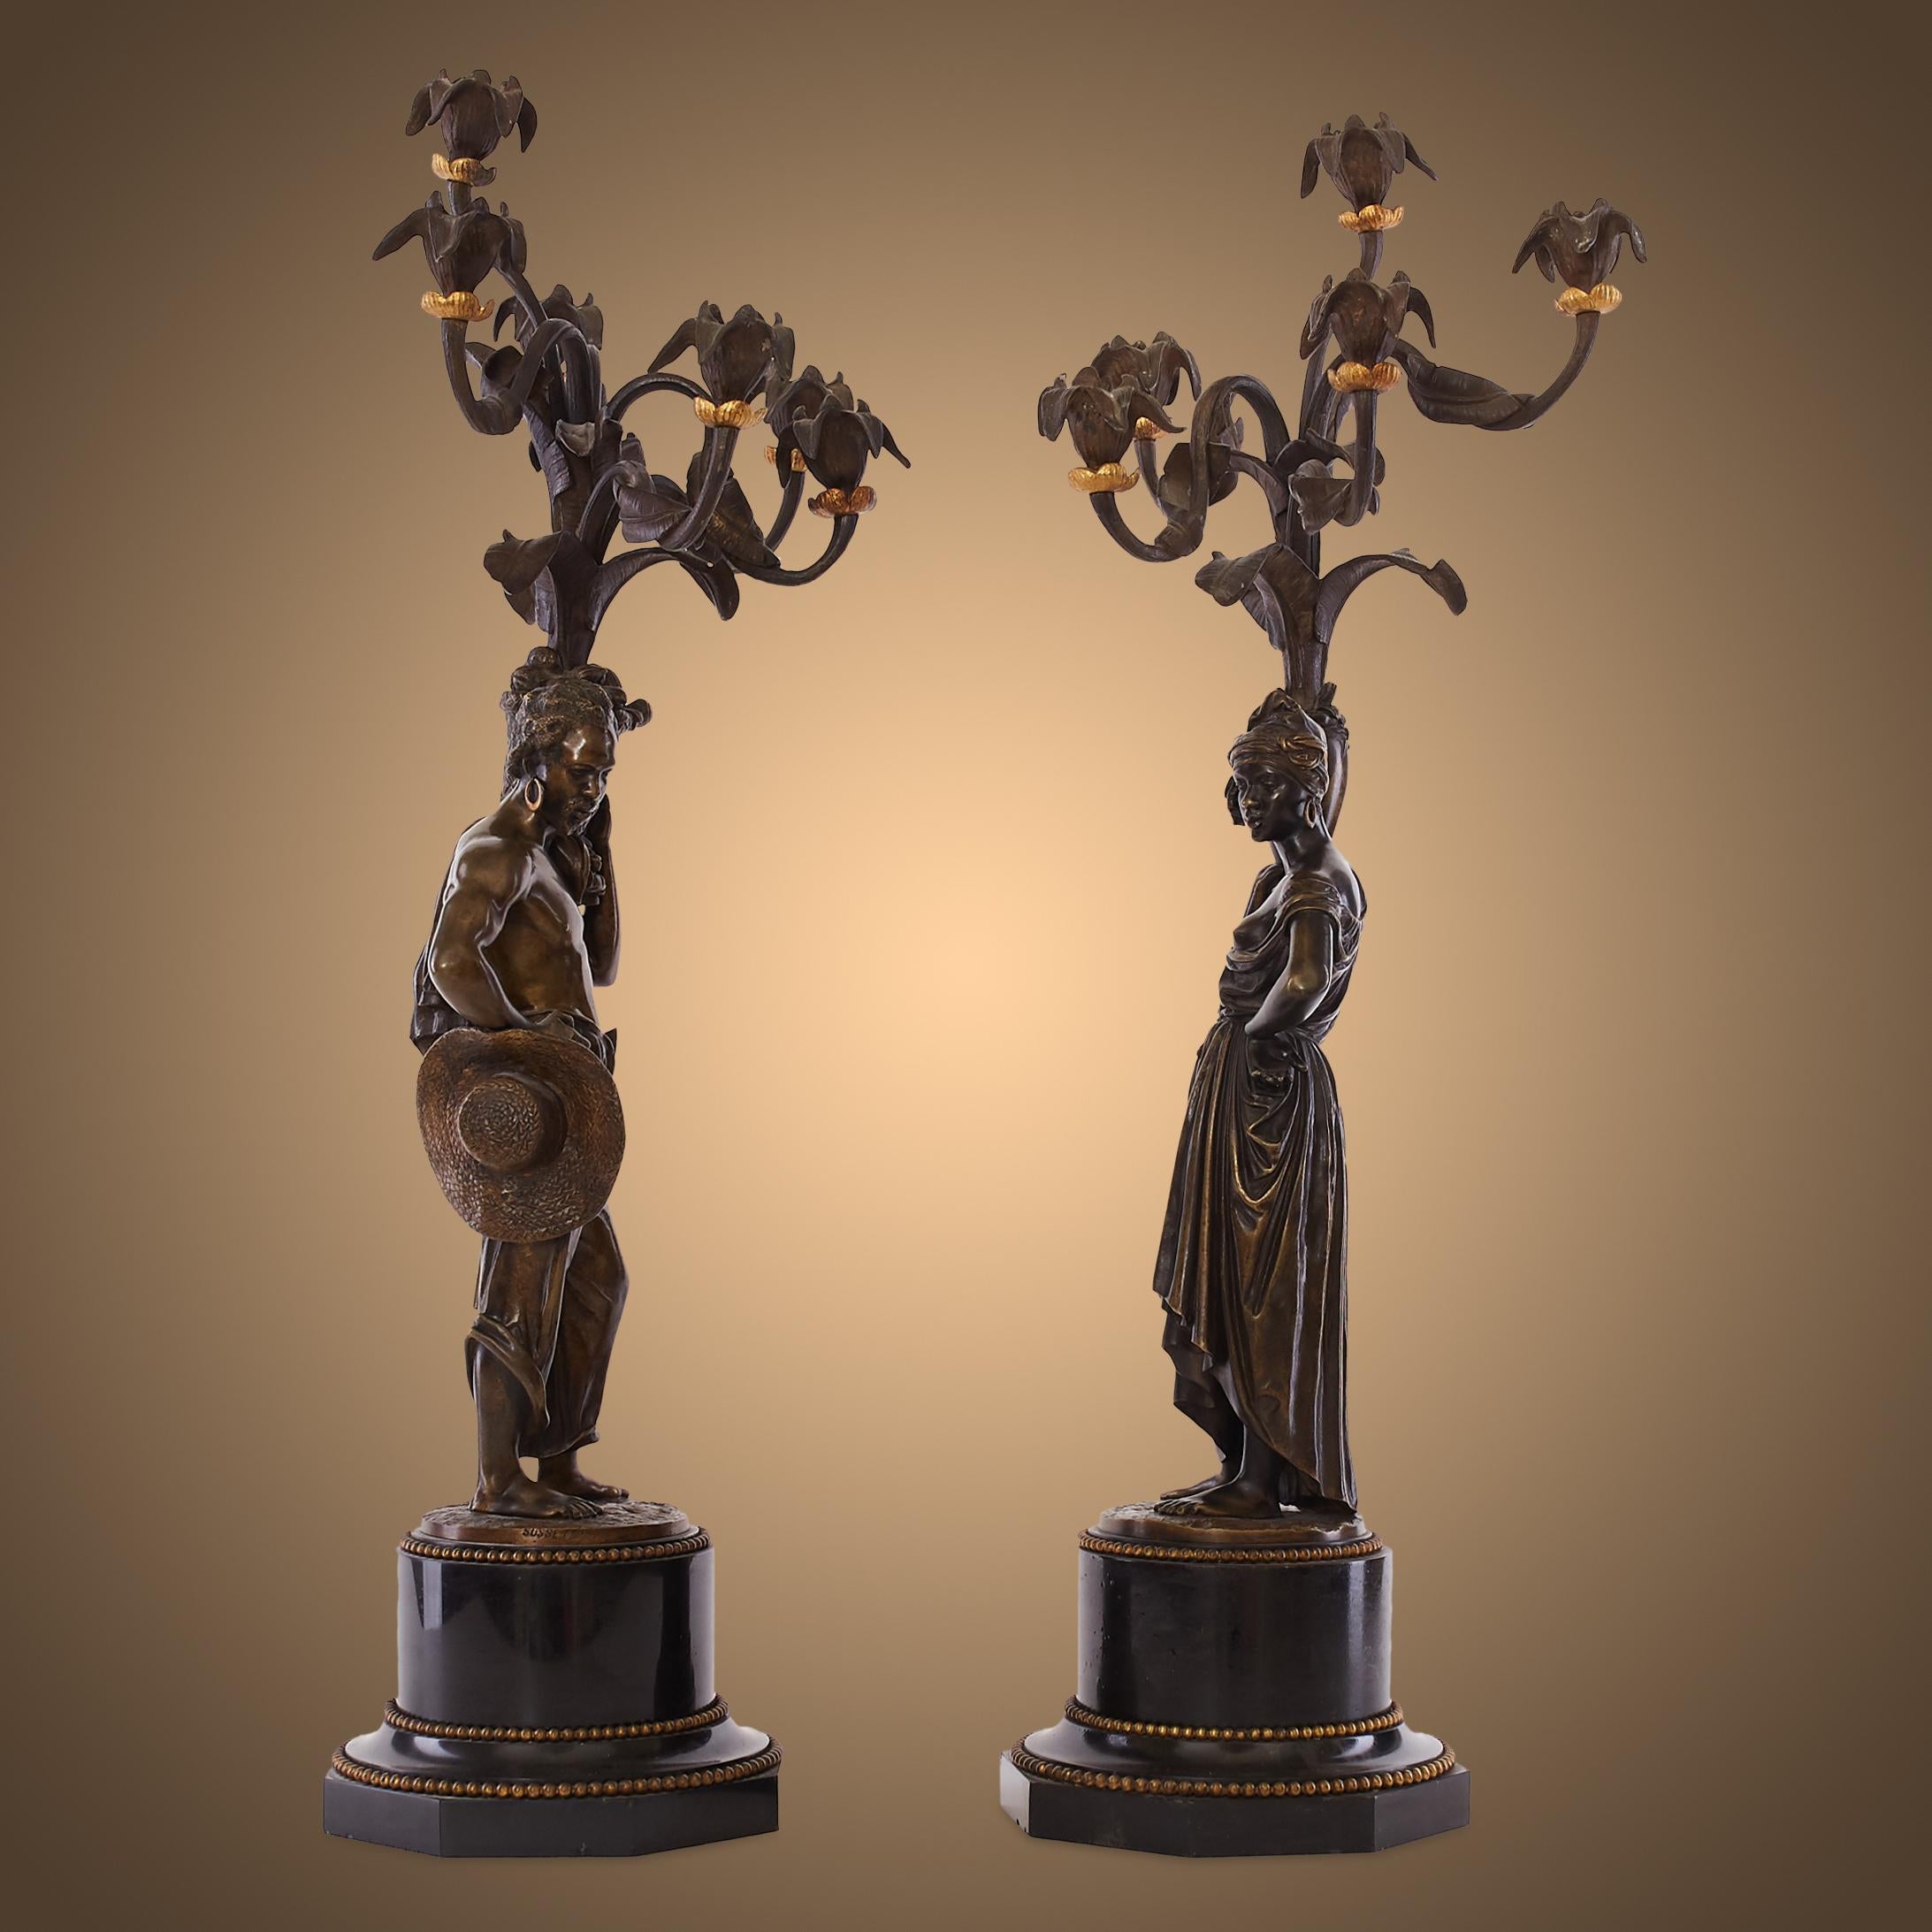 These finely cast 19th-century figural candelabras were made from gilded and burnished bronze, each mounted on Belgian black marble bases and signed by Charles Cumberworth. The sculptures are modelled after African villagers. The female figure is